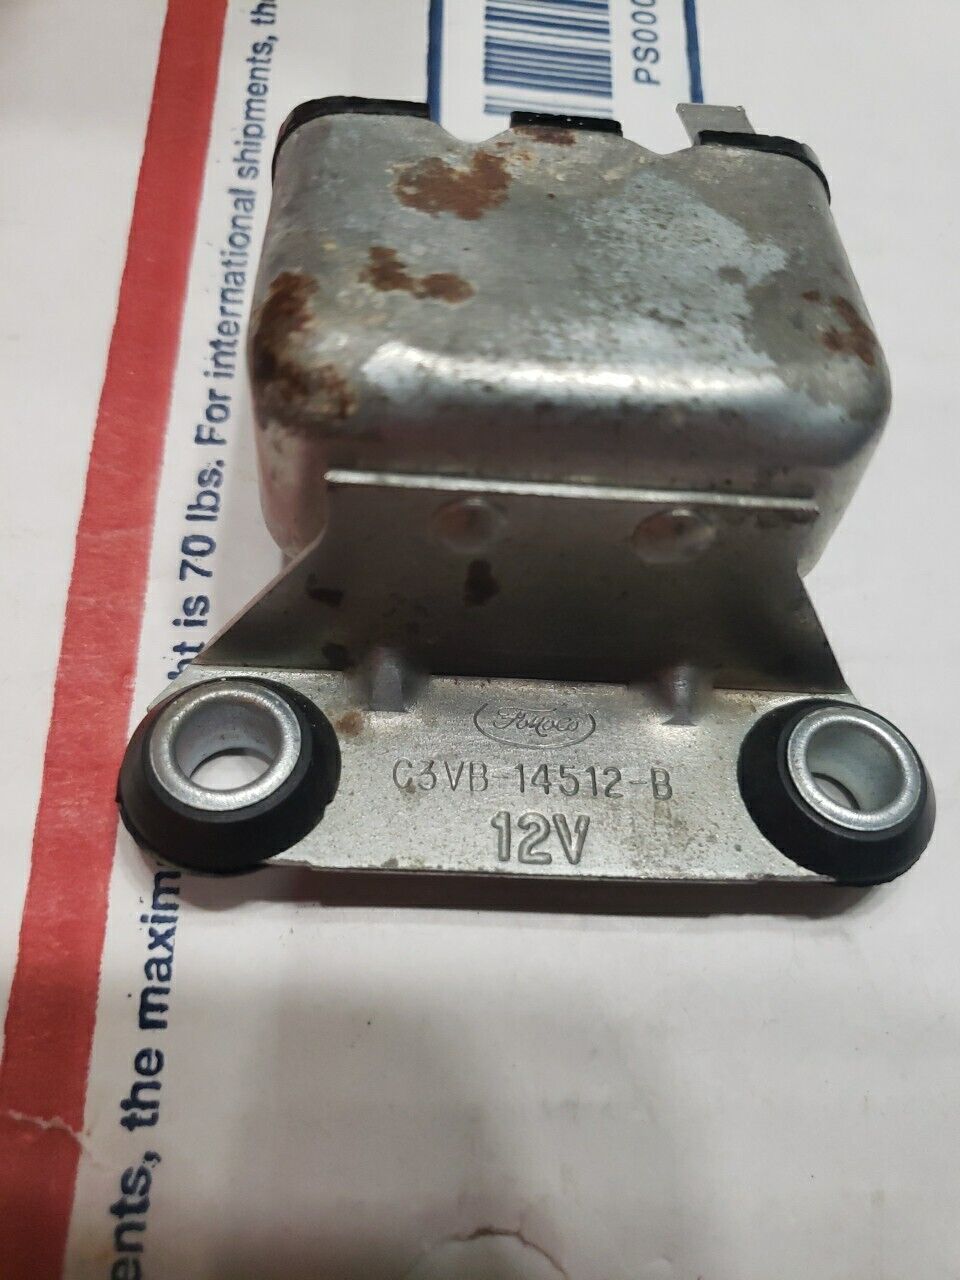 1963-1965 Lincoln Window Down Relay C3VB-14512-B  NEW OLD STOCK